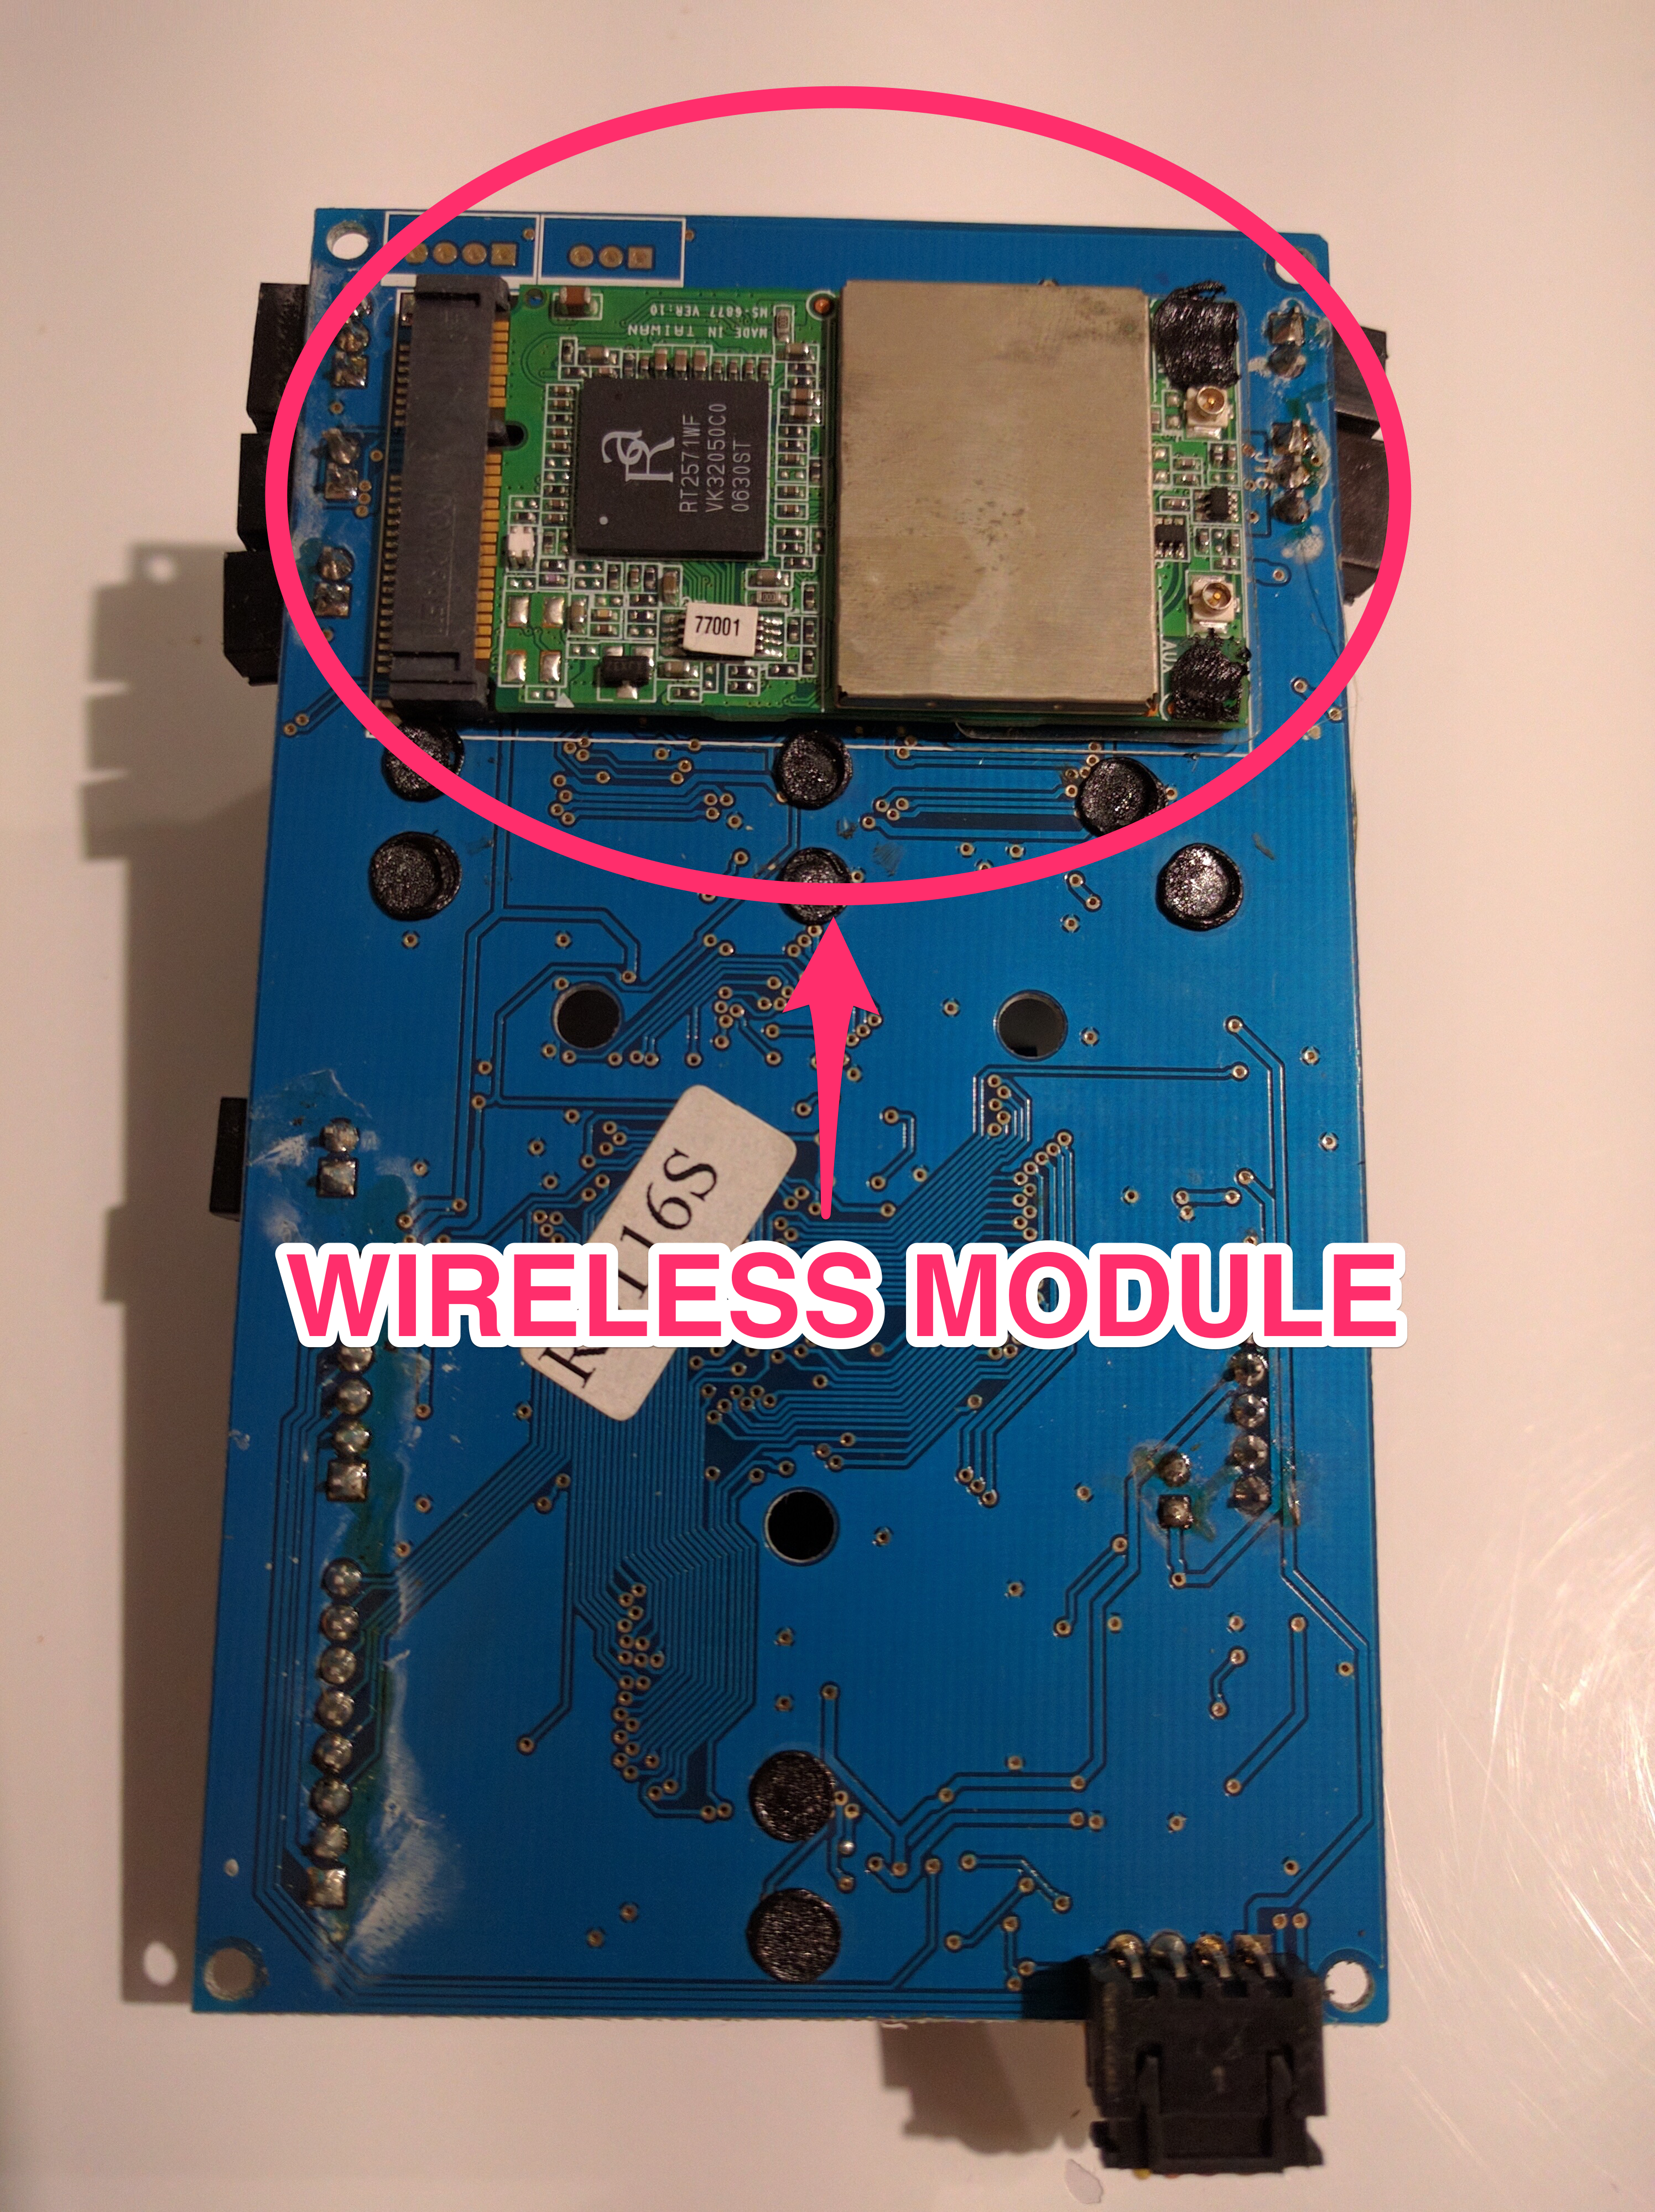 Detailed view of the wireless module